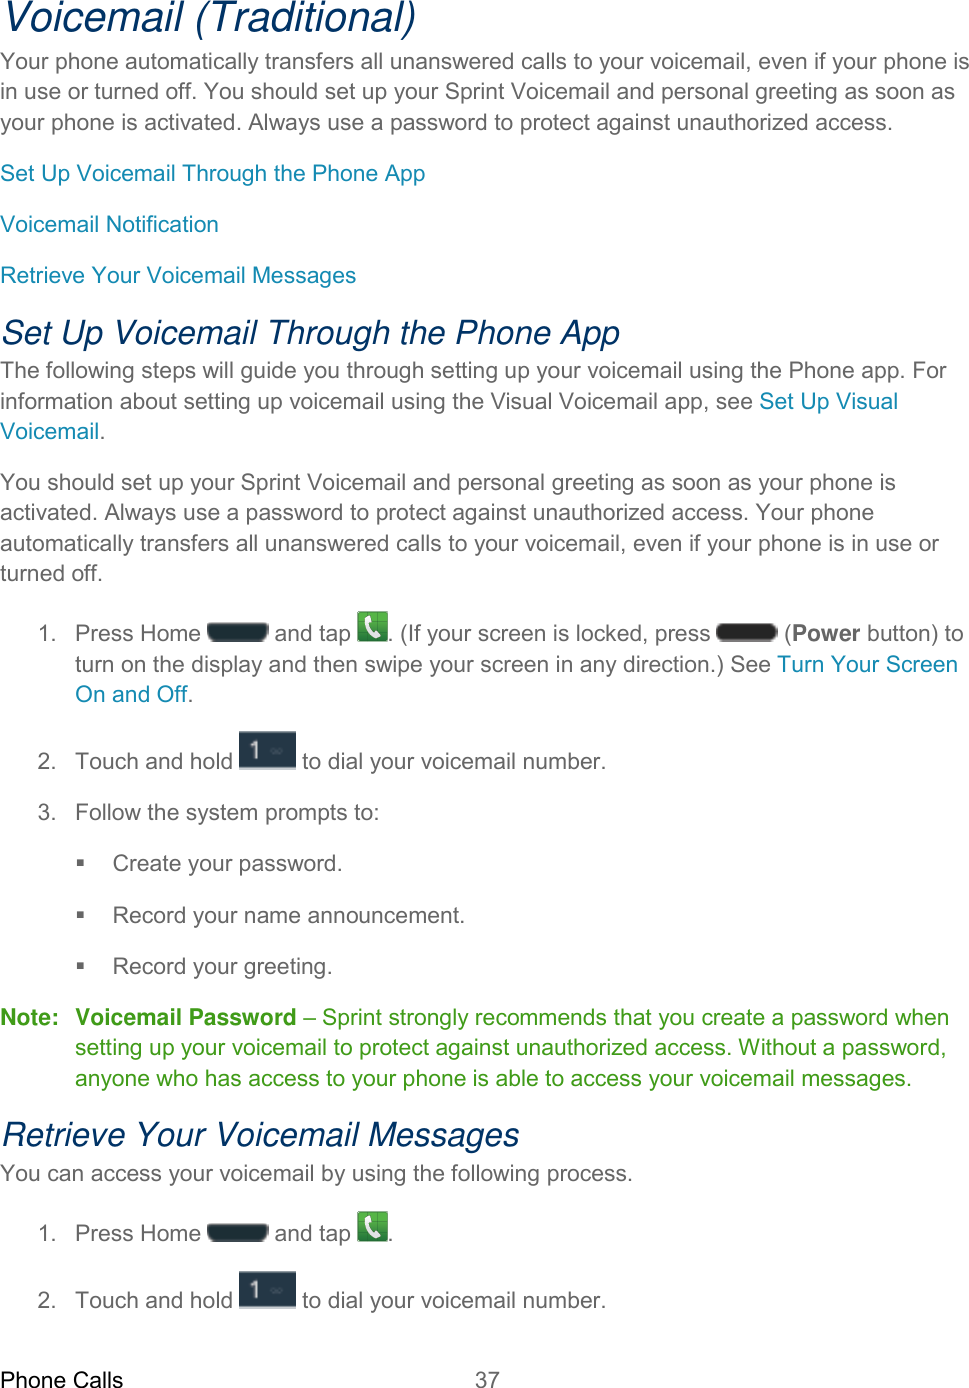 Phone Calls 37   Voicemail (Traditional) Your phone automatically transfers all unanswered calls to your voicemail, even if your phone is in use or turned off. You should set up your Sprint Voicemail and personal greeting as soon as your phone is activated. Always use a password to protect against unauthorized access. Set Up Voicemail Through the Phone App Voicemail Notification Retrieve Your Voicemail Messages Set Up Voicemail Through the Phone App The following steps will guide you through setting up your voicemail using the Phone app. For information about setting up voicemail using the Visual Voicemail app, see Set Up Visual Voicemail. You should set up your Sprint Voicemail and personal greeting as soon as your phone is activated. Always use a password to protect against unauthorized access. Your phone automatically transfers all unanswered calls to your voicemail, even if your phone is in use or turned off. 1.  Press Home  and tap  . (If your screen is locked, press   (Power button) to turn on the display and then swipe your screen in any direction.) See Turn Your Screen On and Off. 2.  Touch and hold  to dial your voicemail number. 3.  Follow the system prompts to:   Create your password.   Record your name announcement.   Record your greeting. Note:  Voicemail Password – Sprint strongly recommends that you create a password when setting up your voicemail to protect against unauthorized access. Without a password, anyone who has access to your phone is able to access your voicemail messages. Retrieve Your Voicemail Messages You can access your voicemail by using the following process.  1.  Press Home  and tap  . 2.  Touch and hold  to dial your voicemail number. 